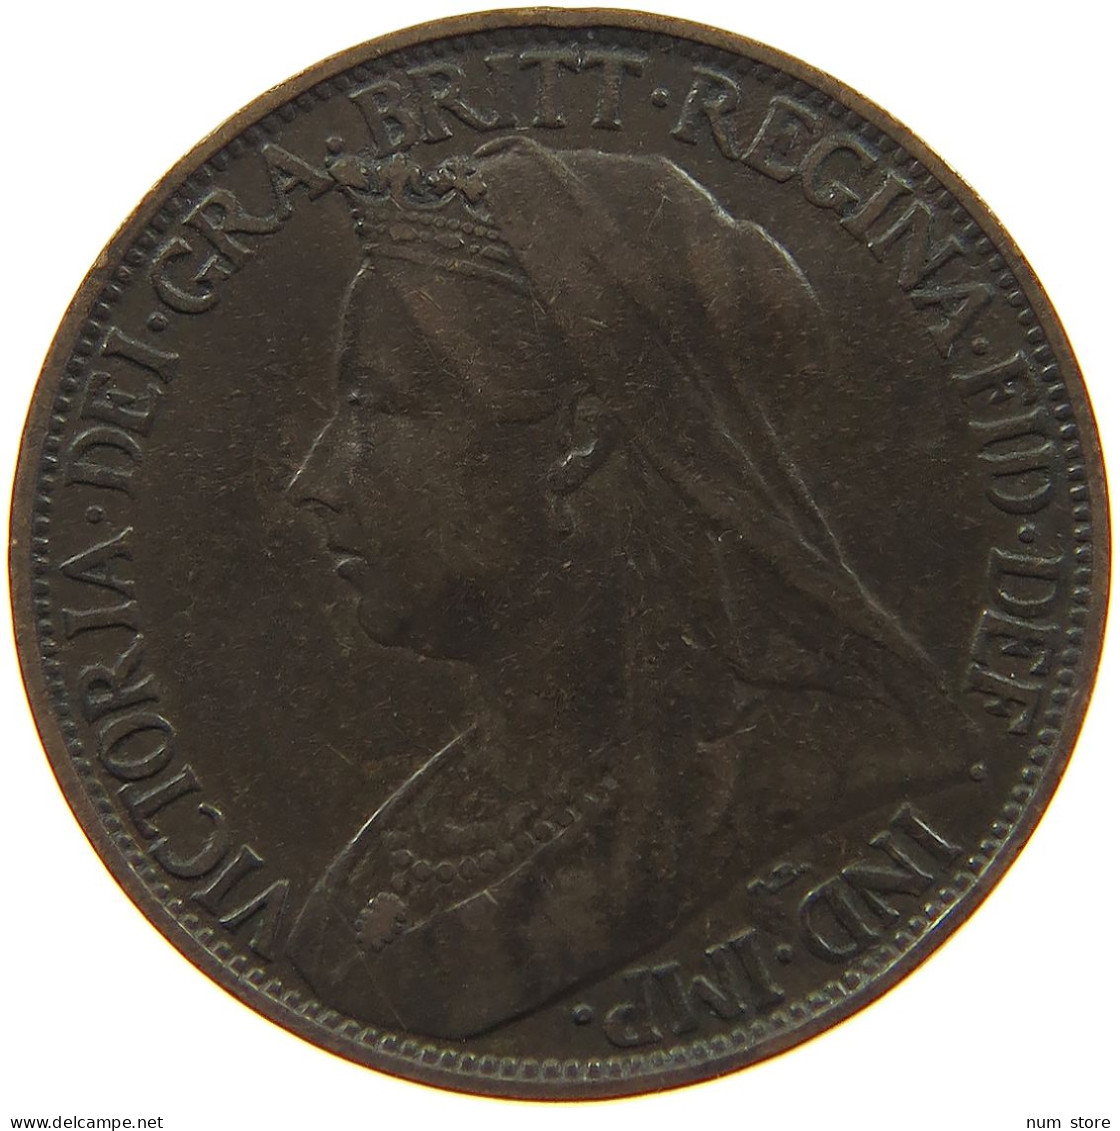 GREAT BRITAIN FARTHING 1896 Victoria 1837-1901 #a011 0983 - B. 1 Farthing